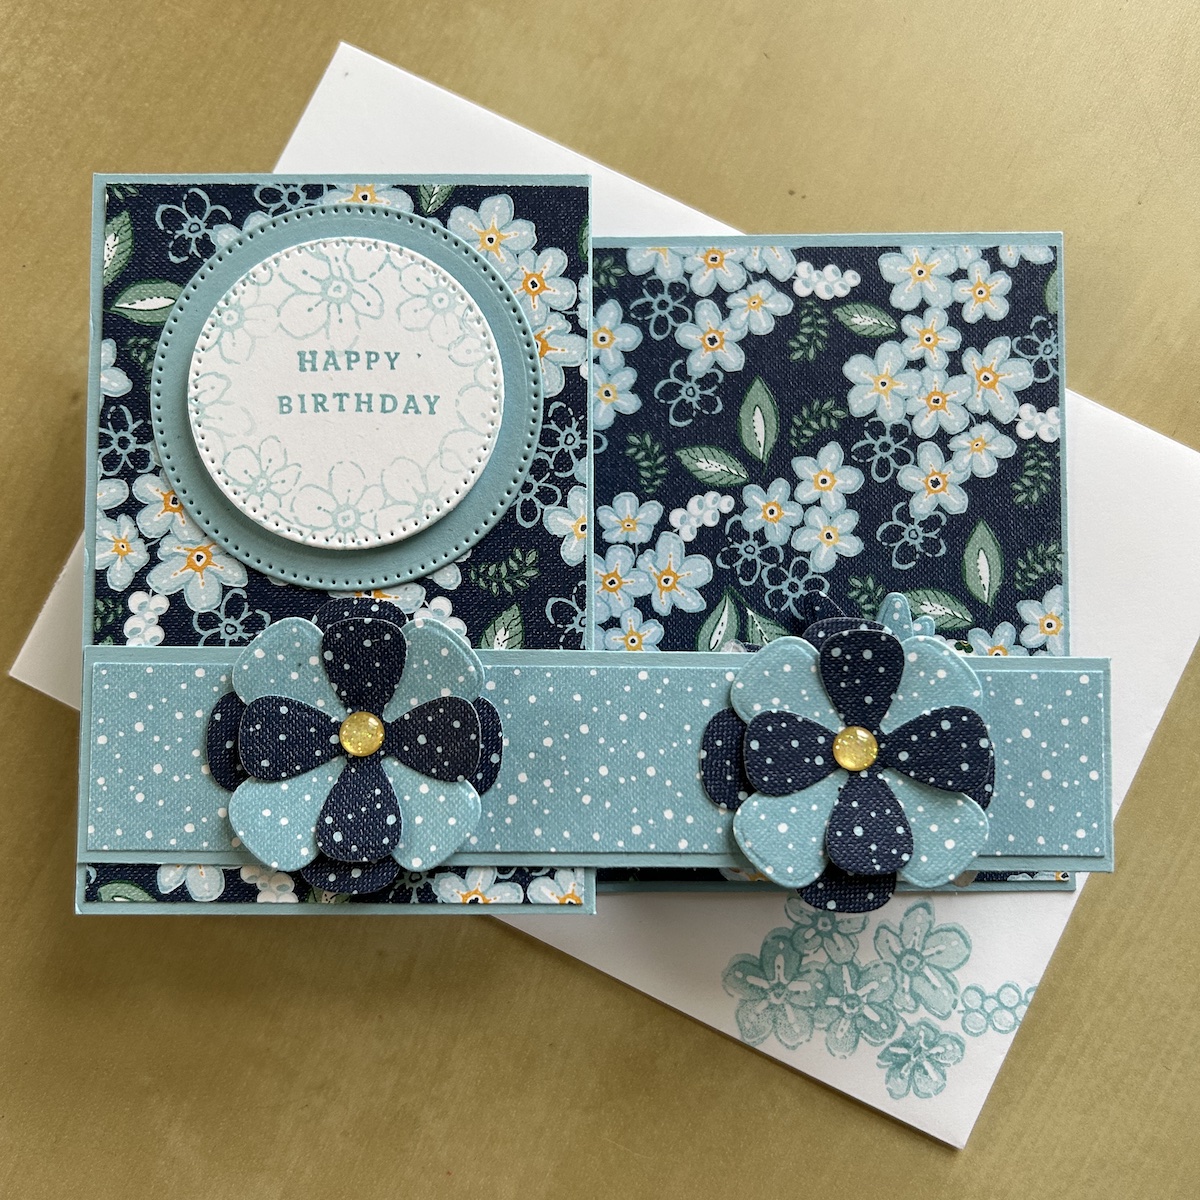 T4S blog hop: How to make a Double Z fold card - Crafty Carol's Cards